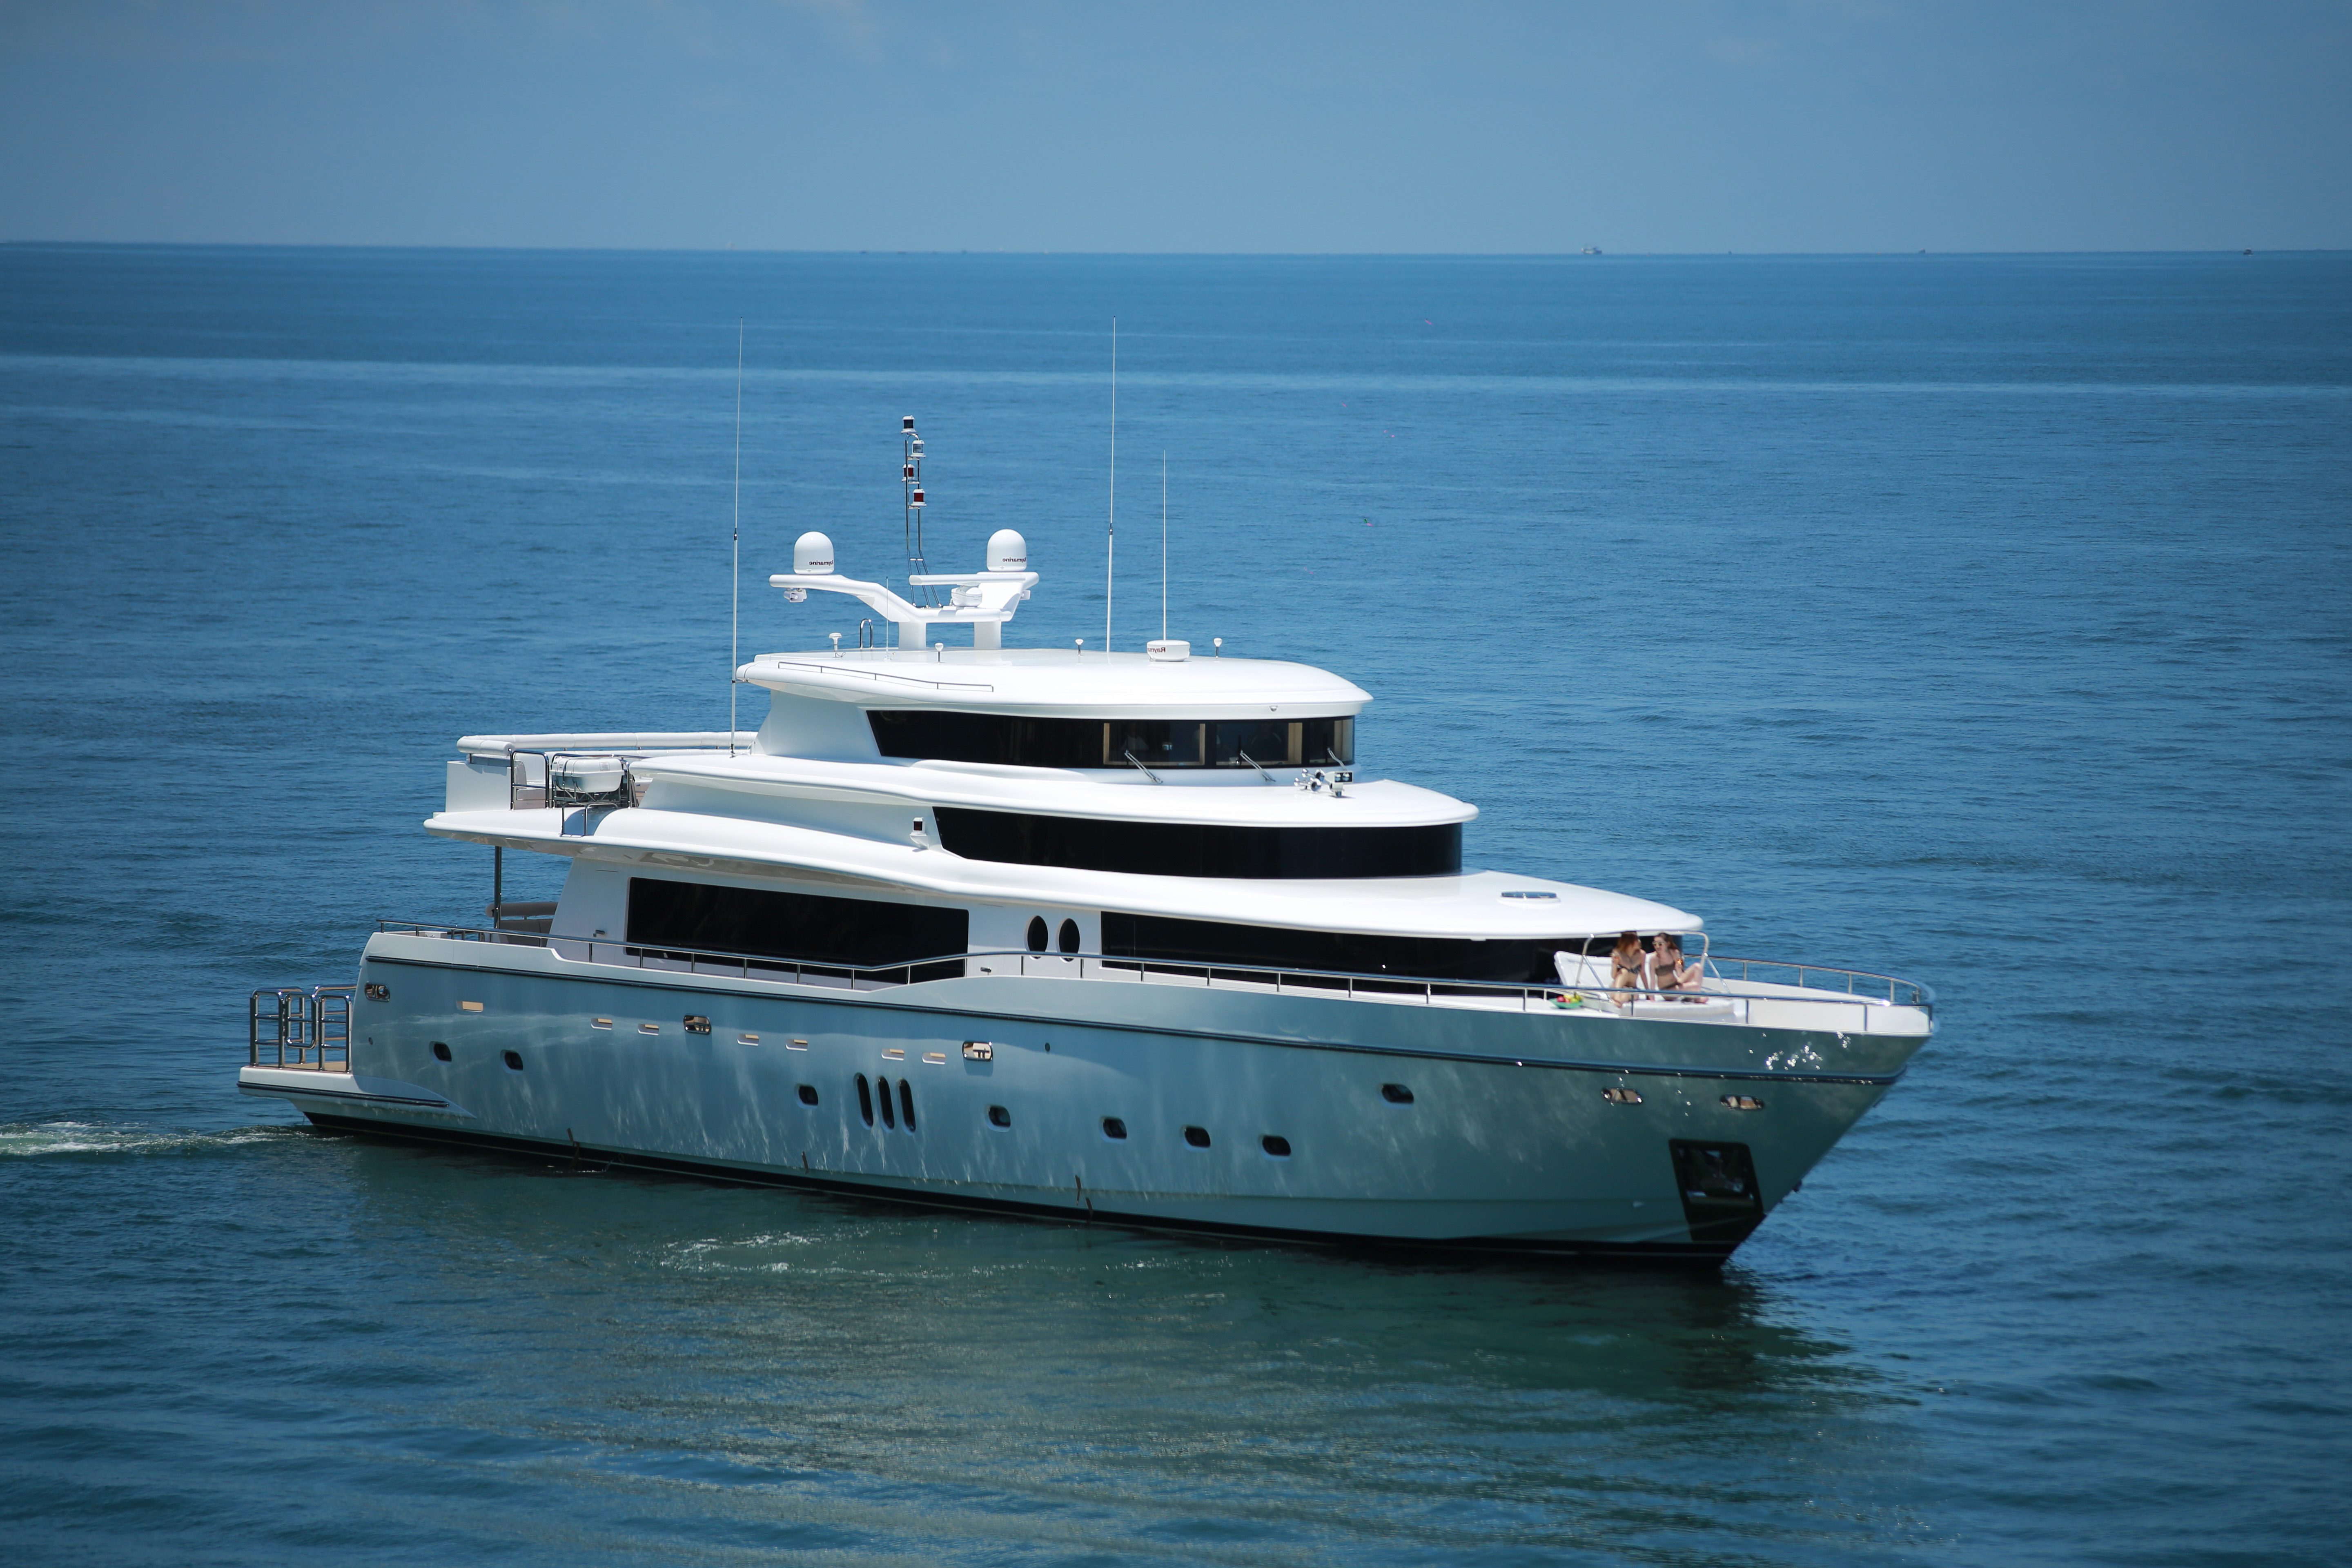 JOHNSON 108 charter specs and number of guests